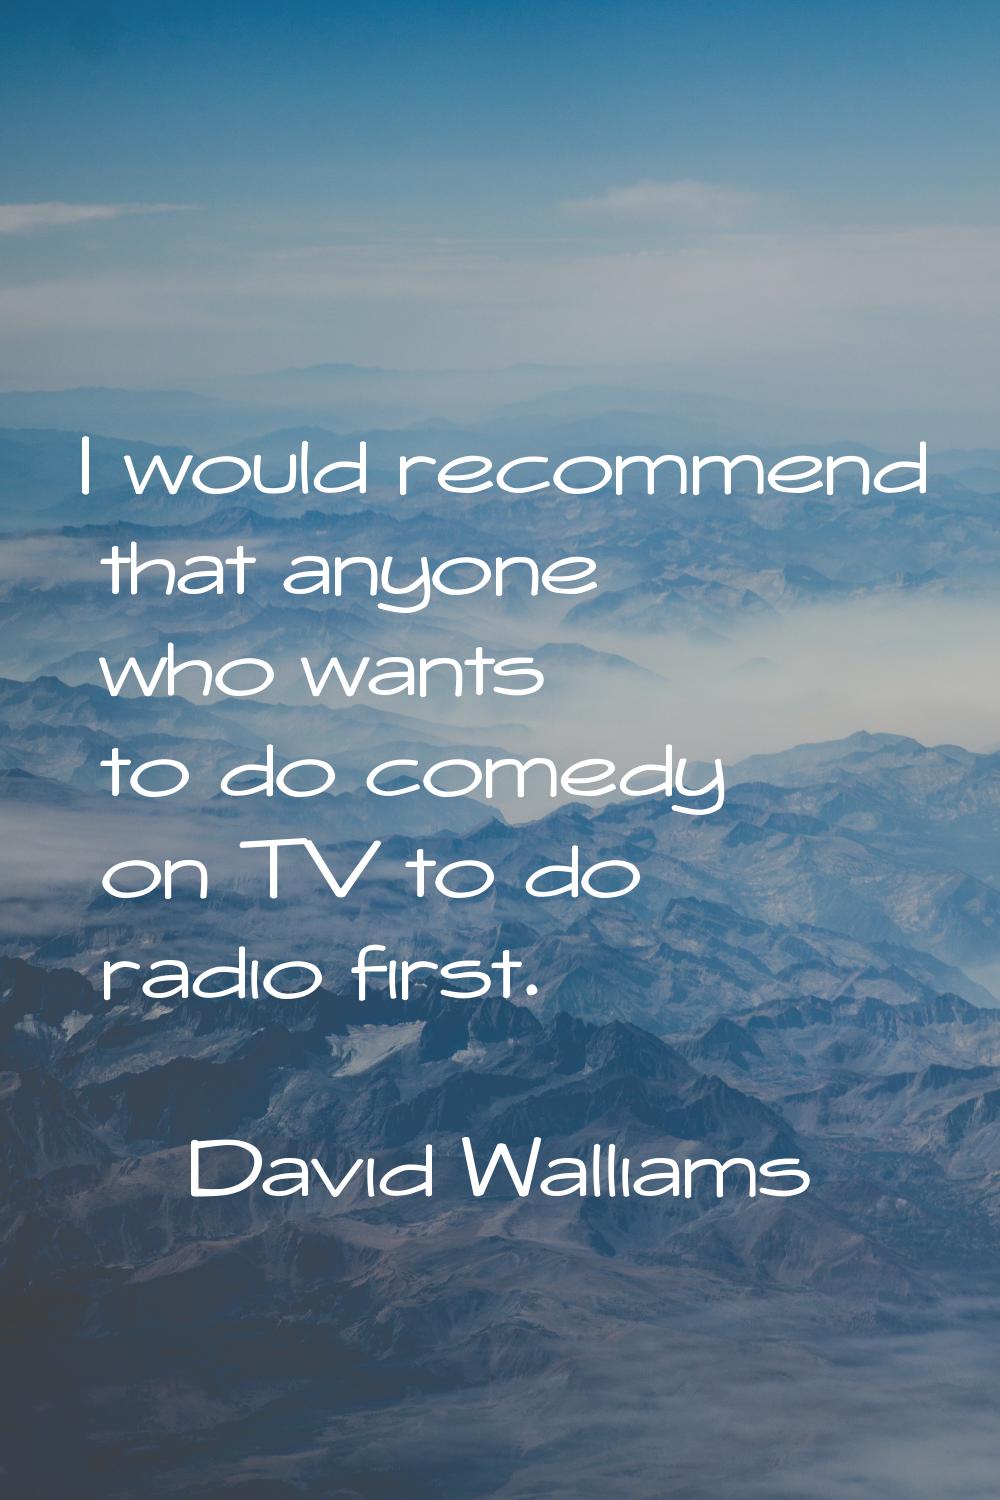 I would recommend that anyone who wants to do comedy on TV to do radio first.